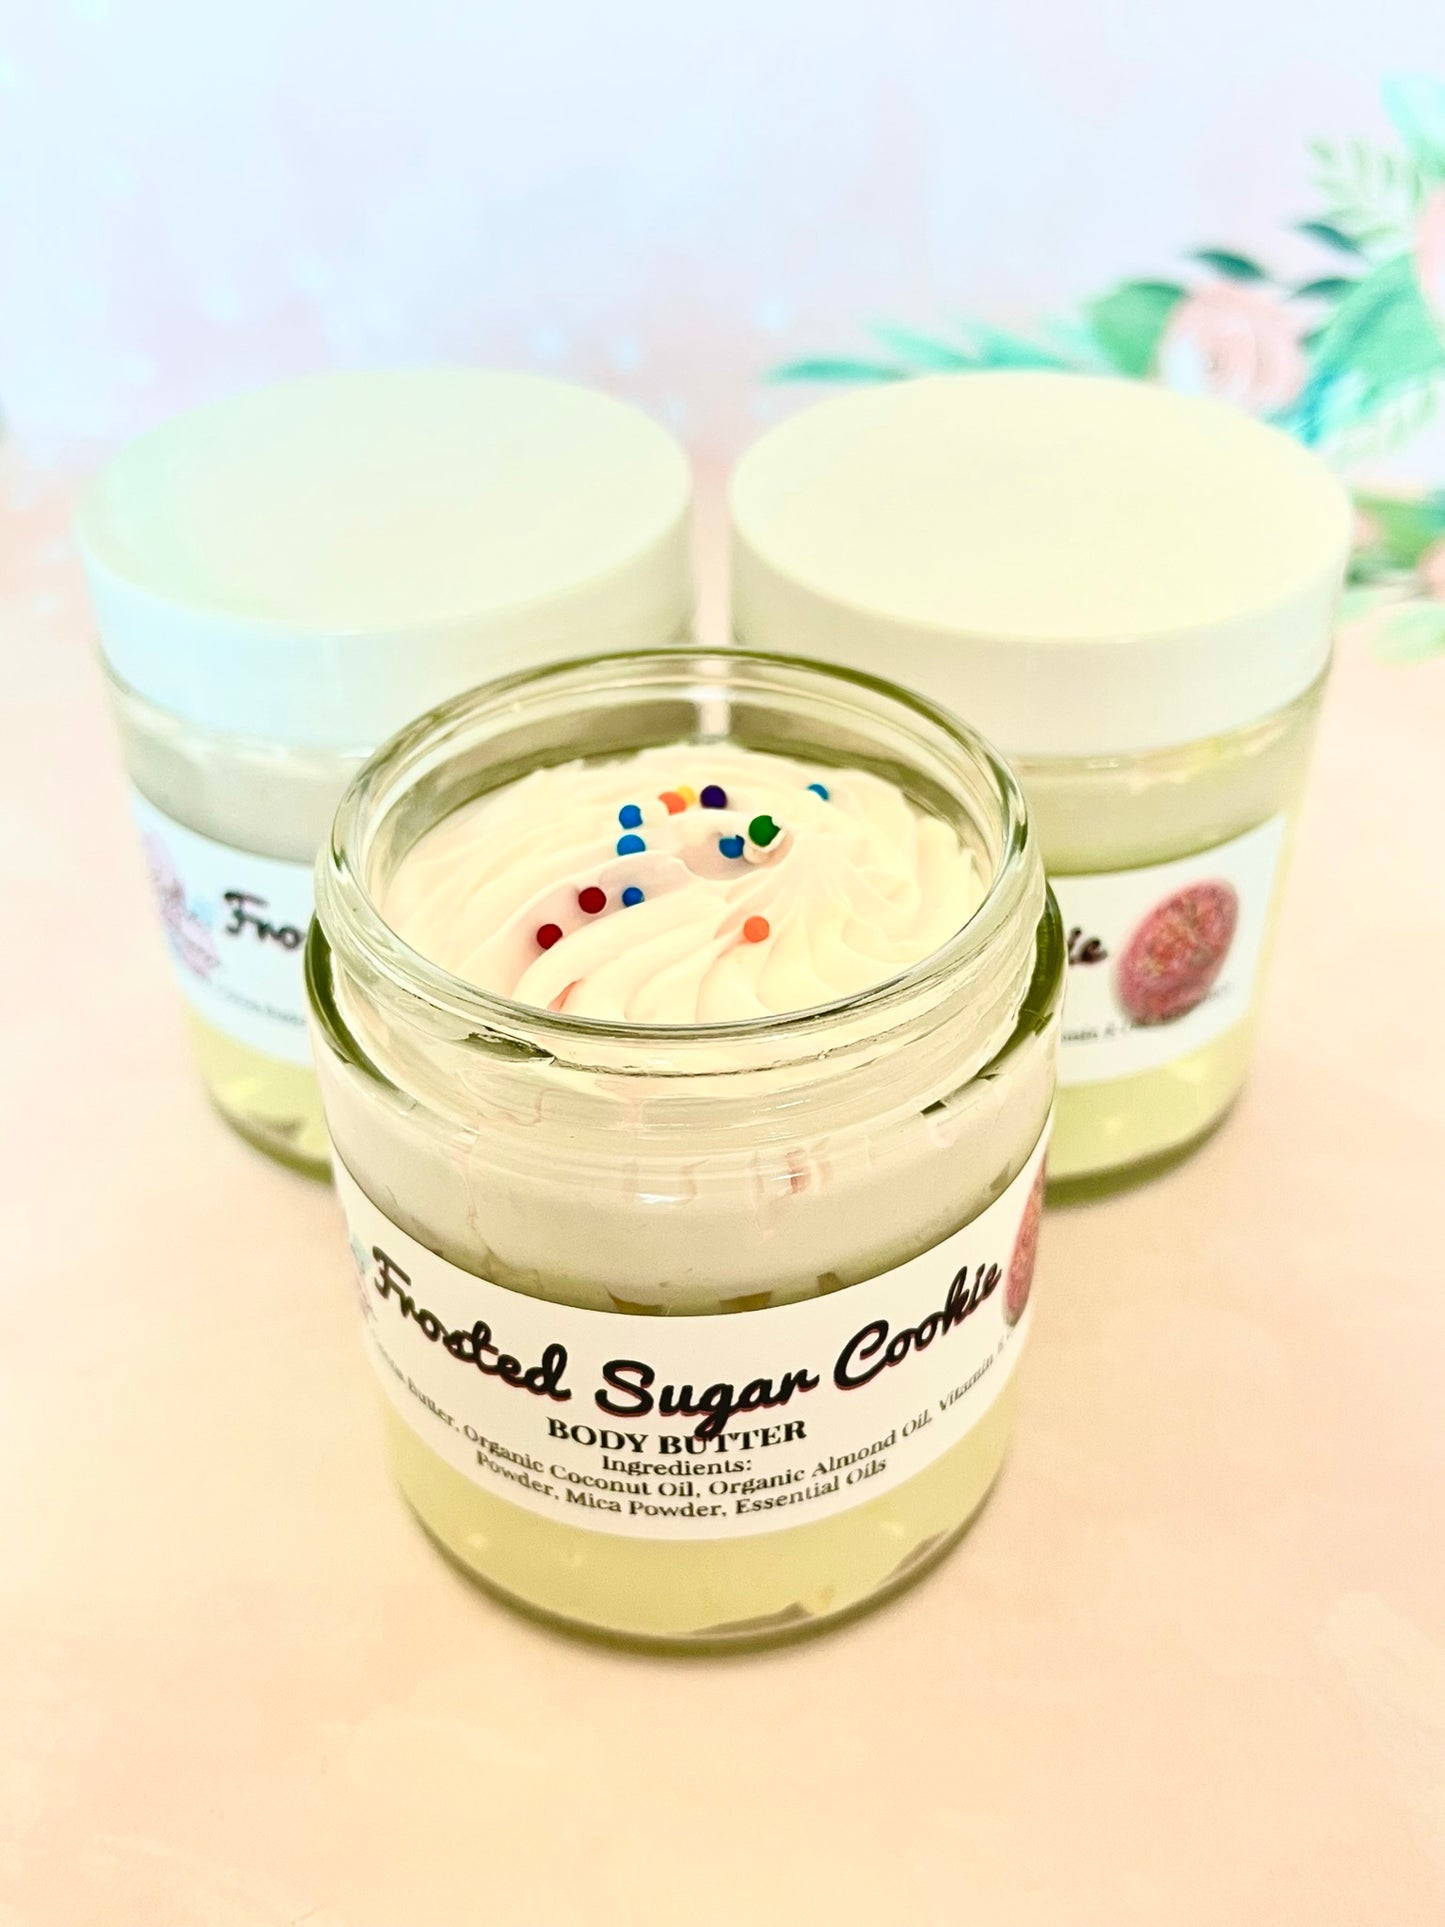 Frosted Sugar Cookie Body Butter